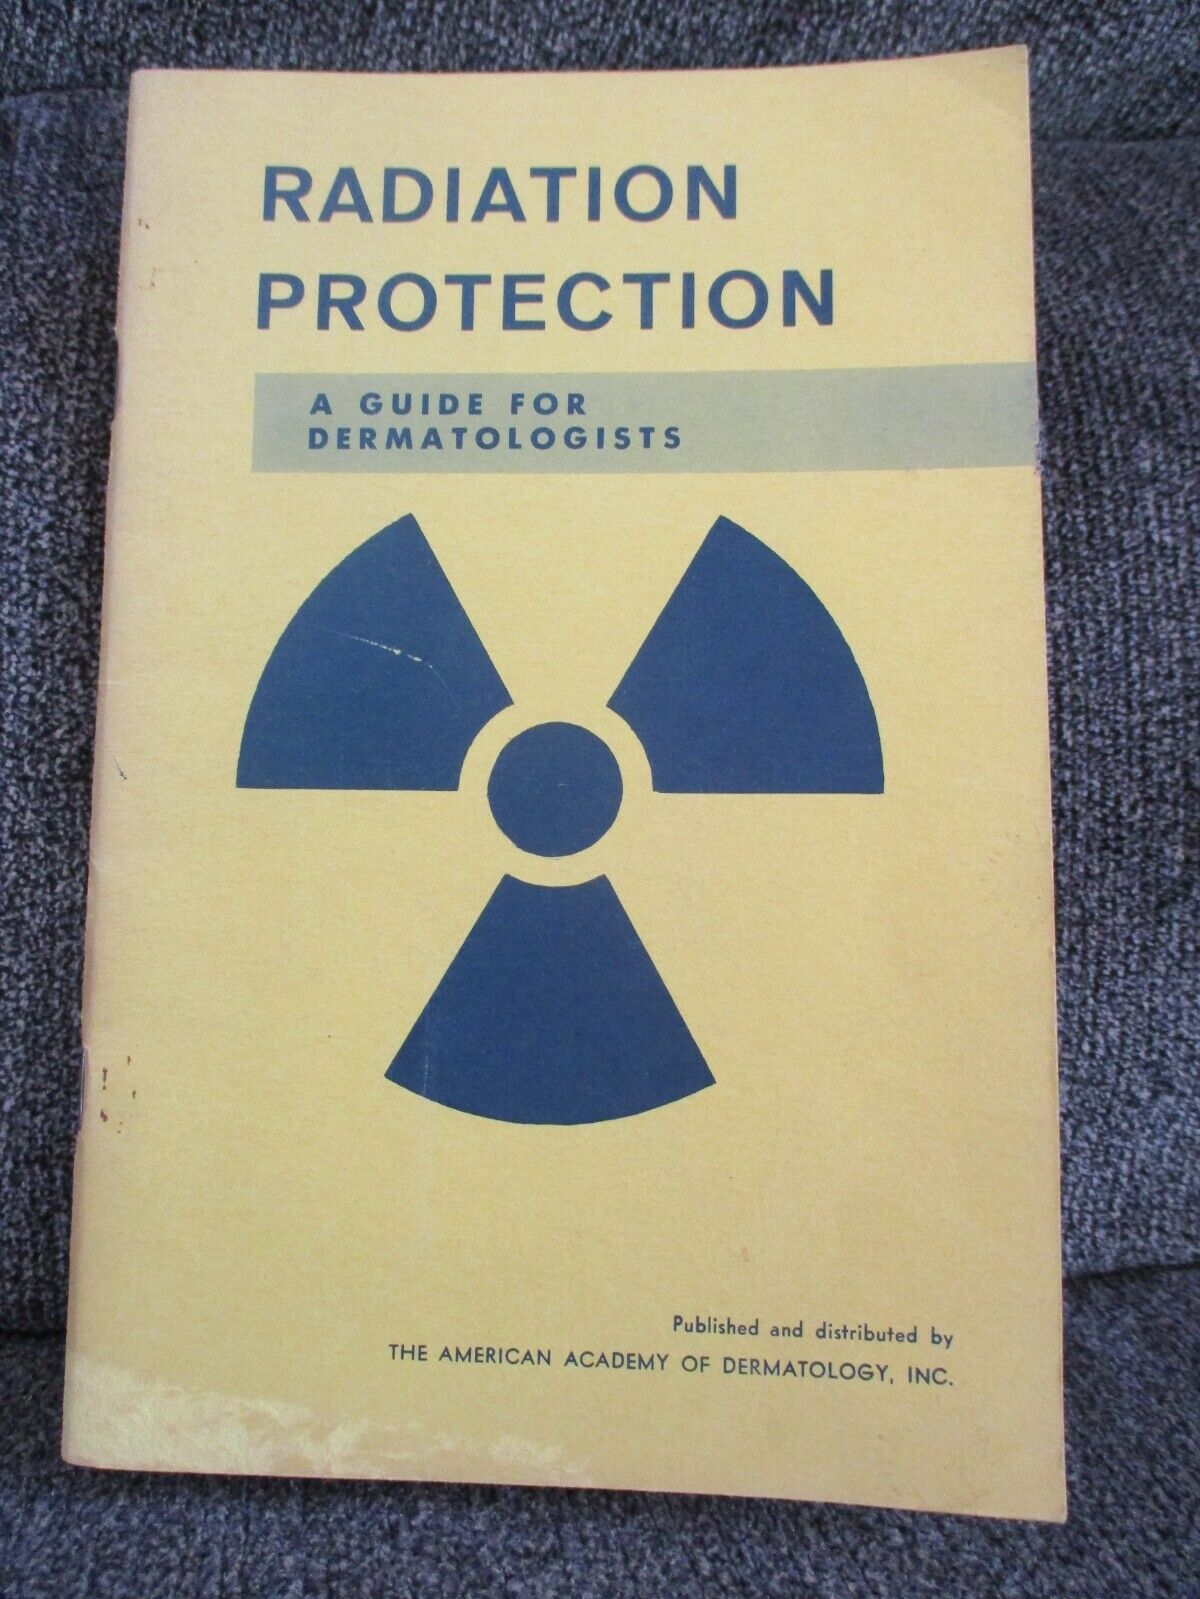 Radiation Protection A Guide For Dermatologists American Academy of Dermatology